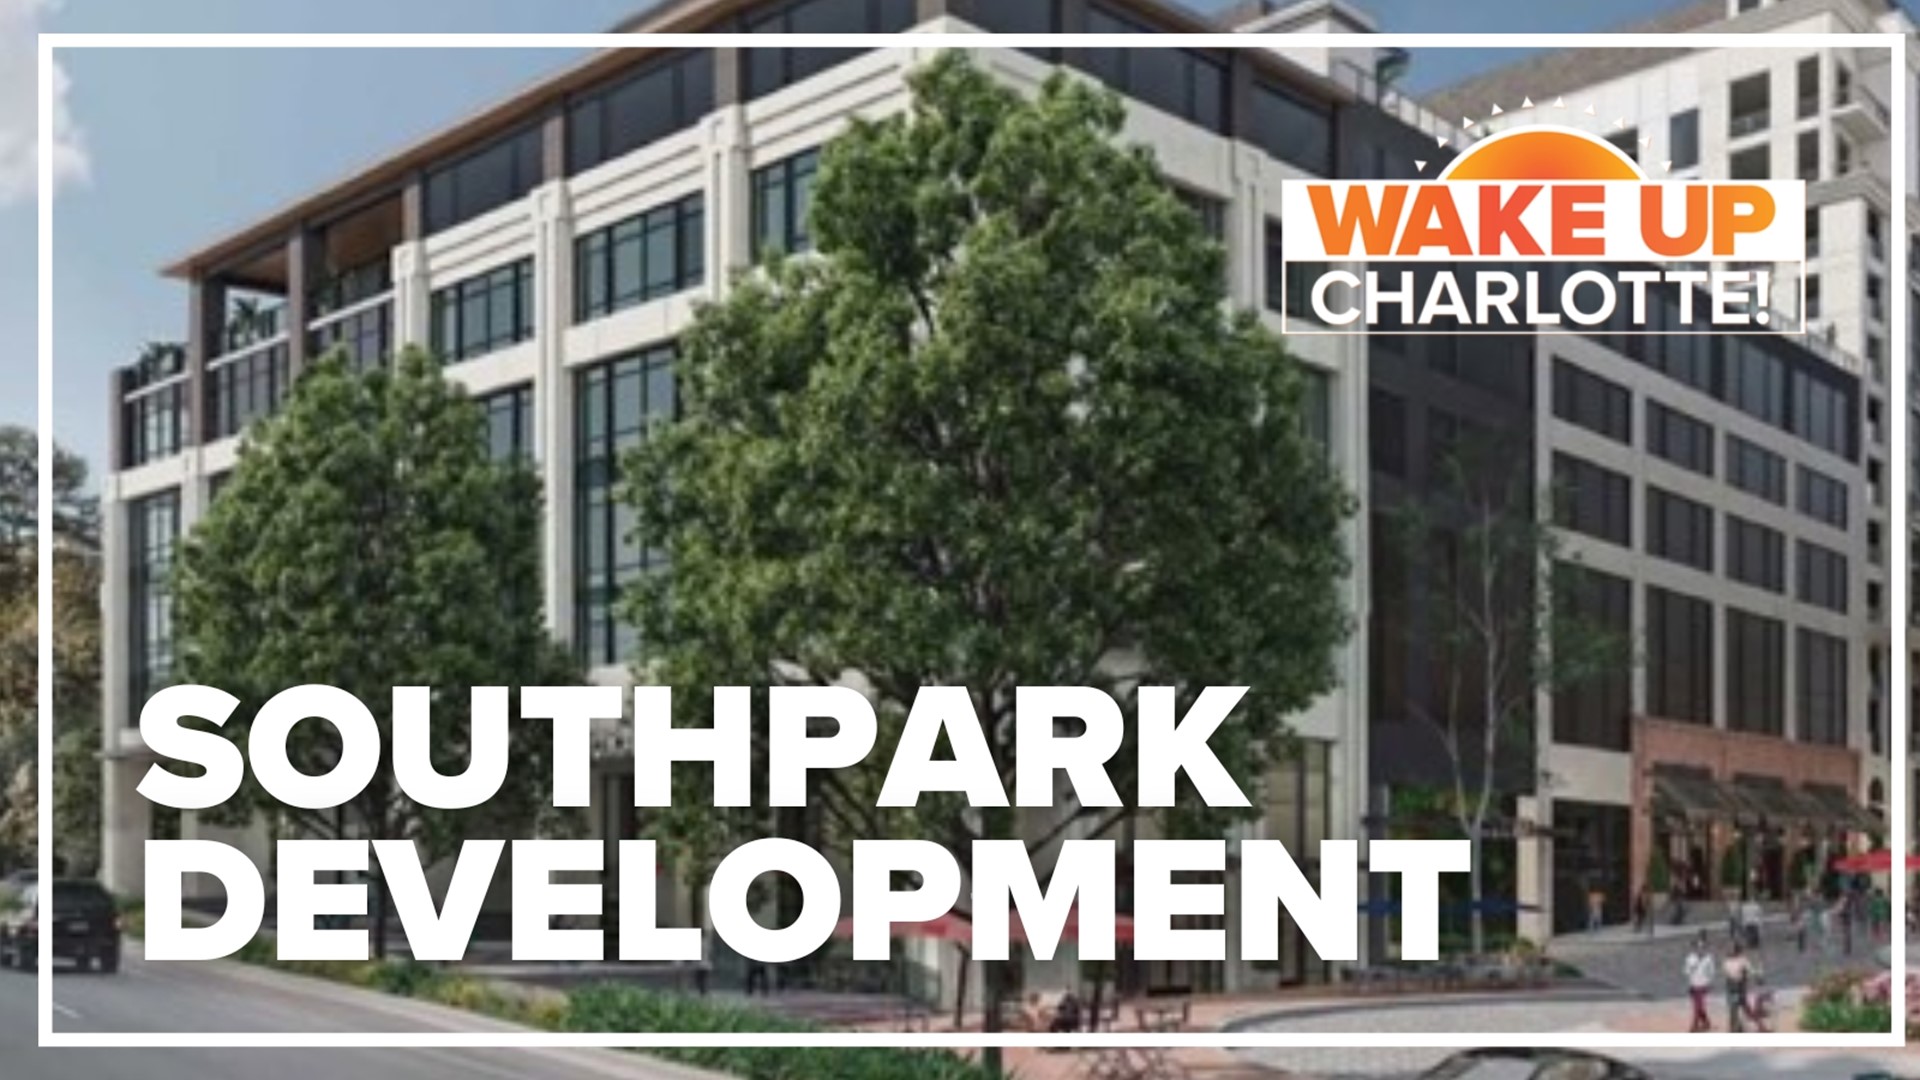 Charlotte city leaders are moving forward with plans to develop more housing and retail space in South Park.